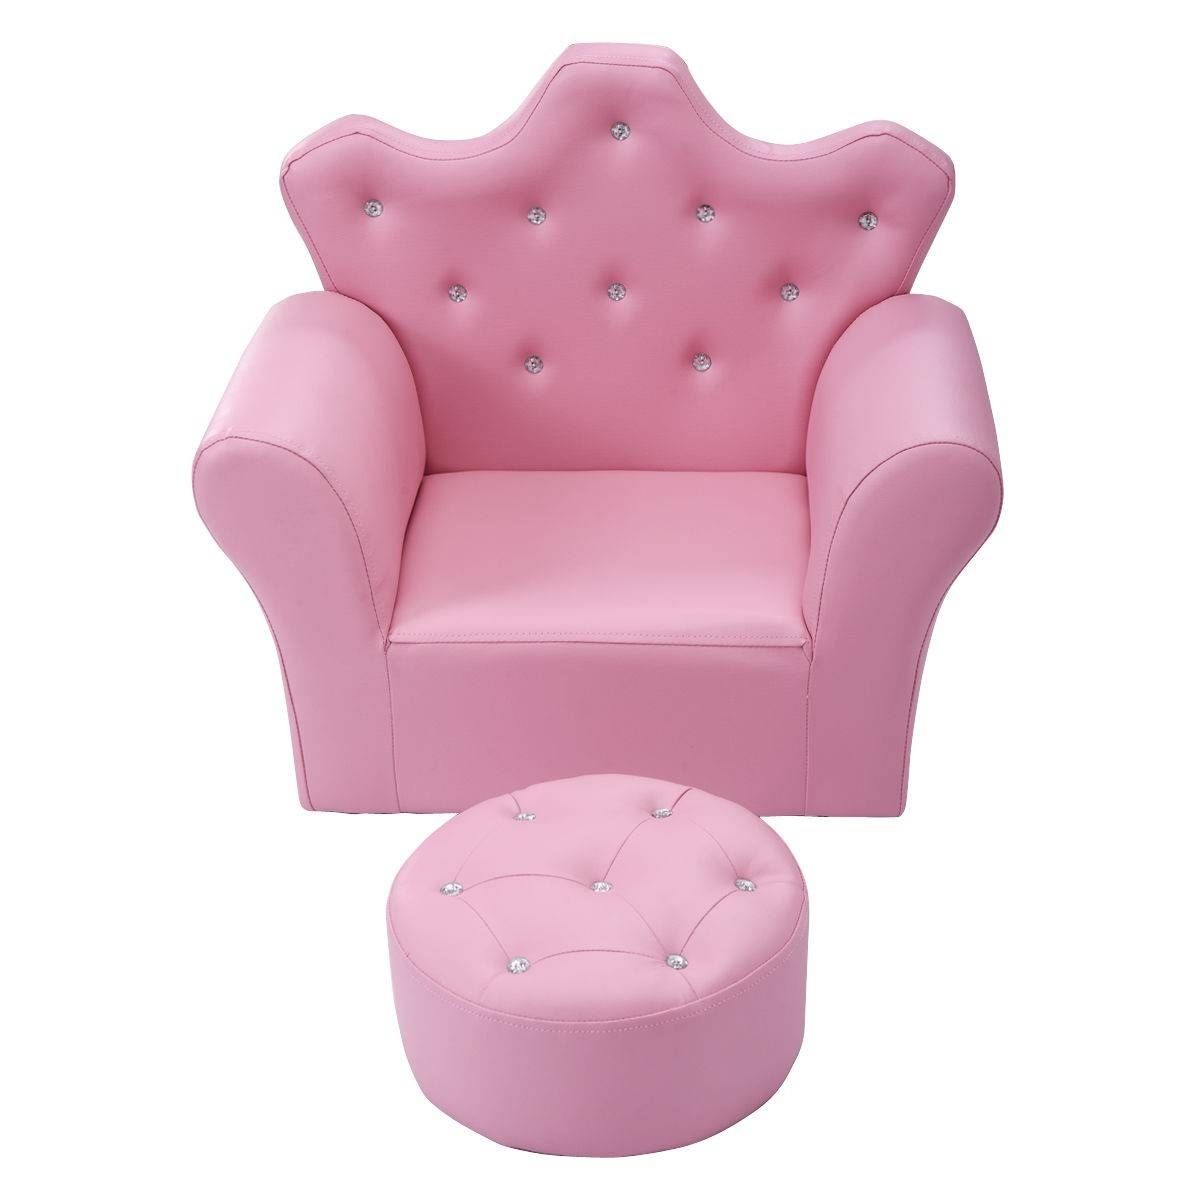 Pink Kids Sofa Armrest Couch With Ottoman – Sofas – Furniture Throughout Sofa Chair With Ottoman (View 17 of 30)